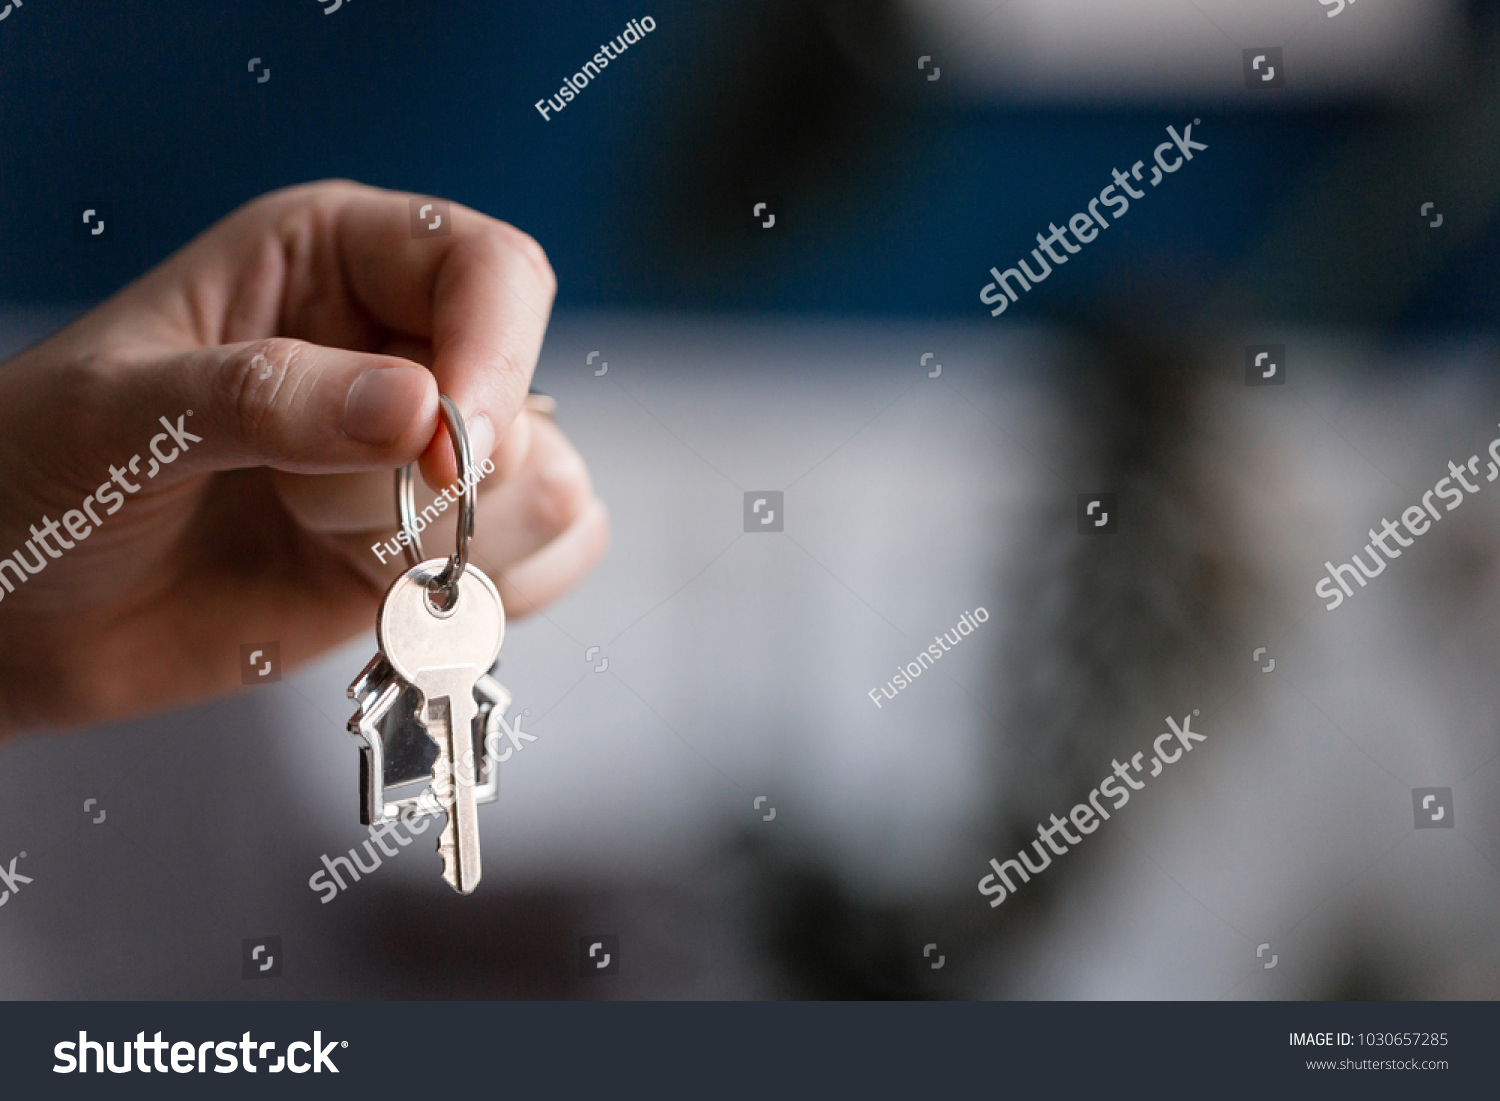 Mortgage concept. Men hand holding key with house shaped keychain. Modern light lobby interior. Real estate, moving home or renting property. #1030657285